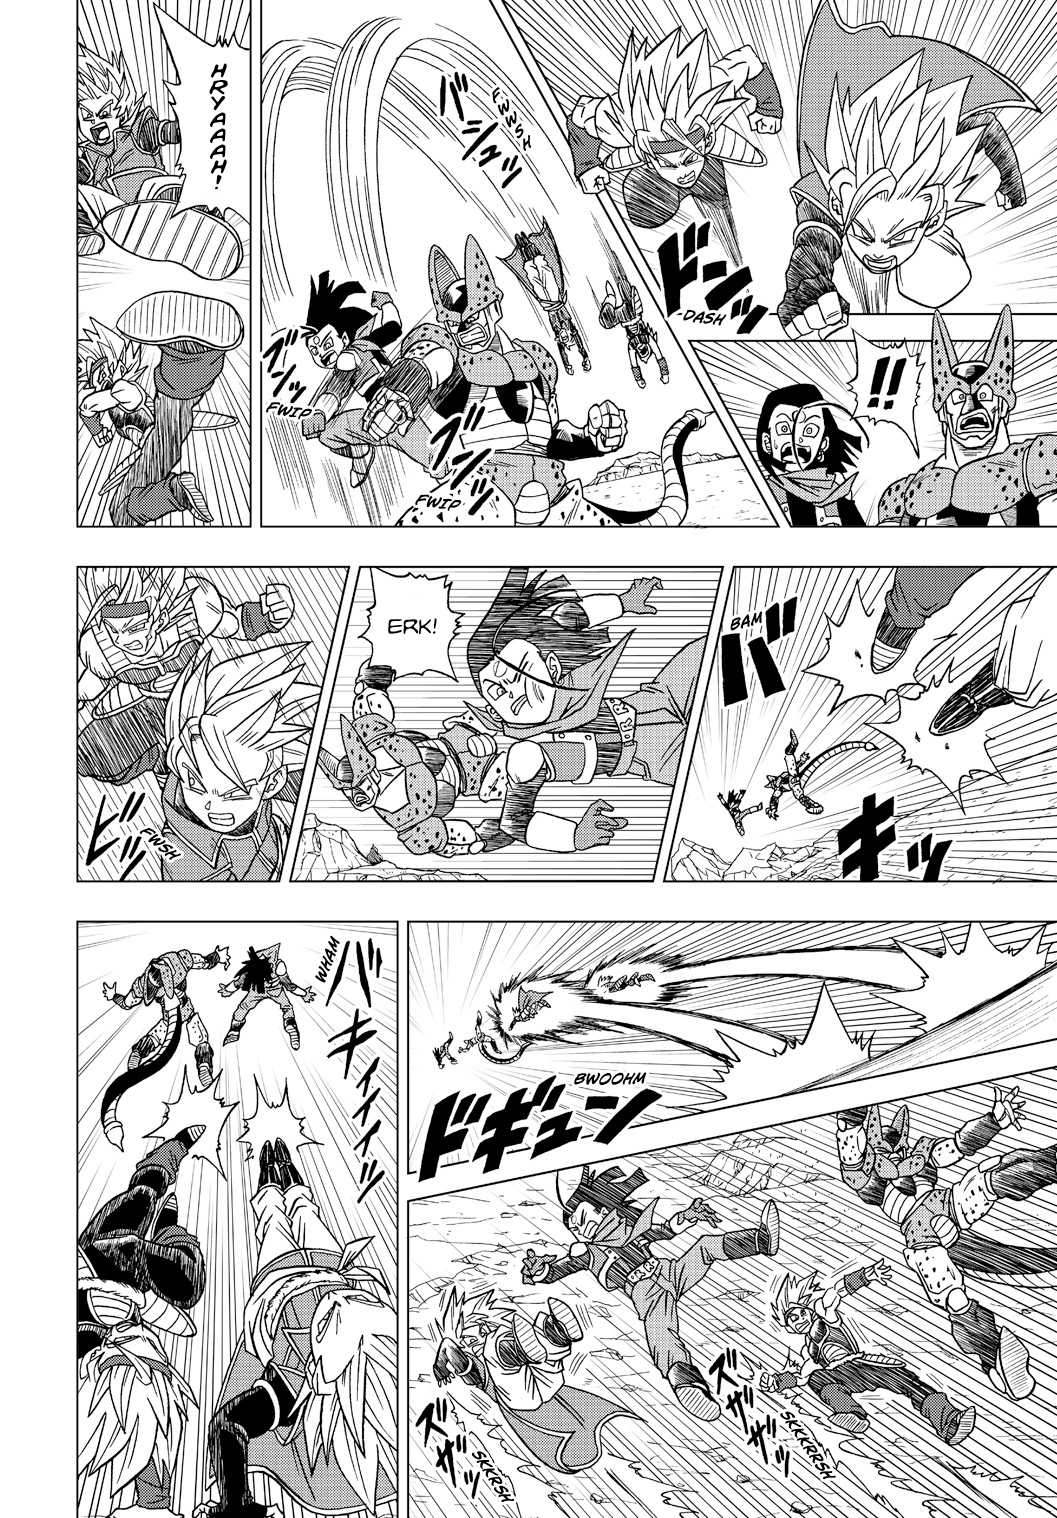 Dragon Ball Heroes - Victory Mission - Page 2